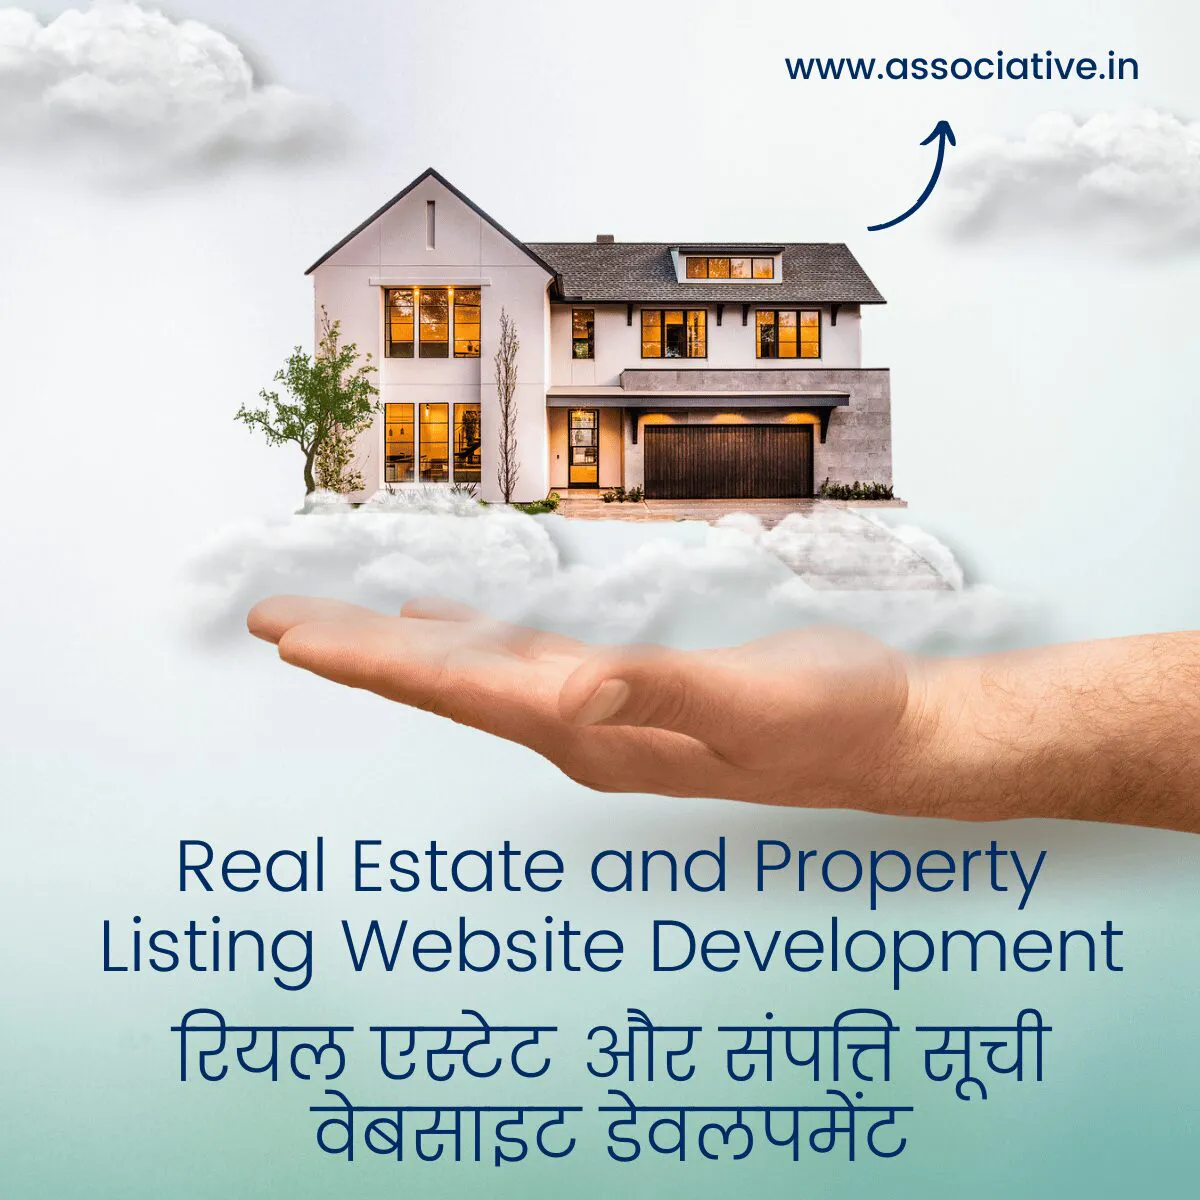 Property Website Development: Create Online Presence for Your Real Estate Business